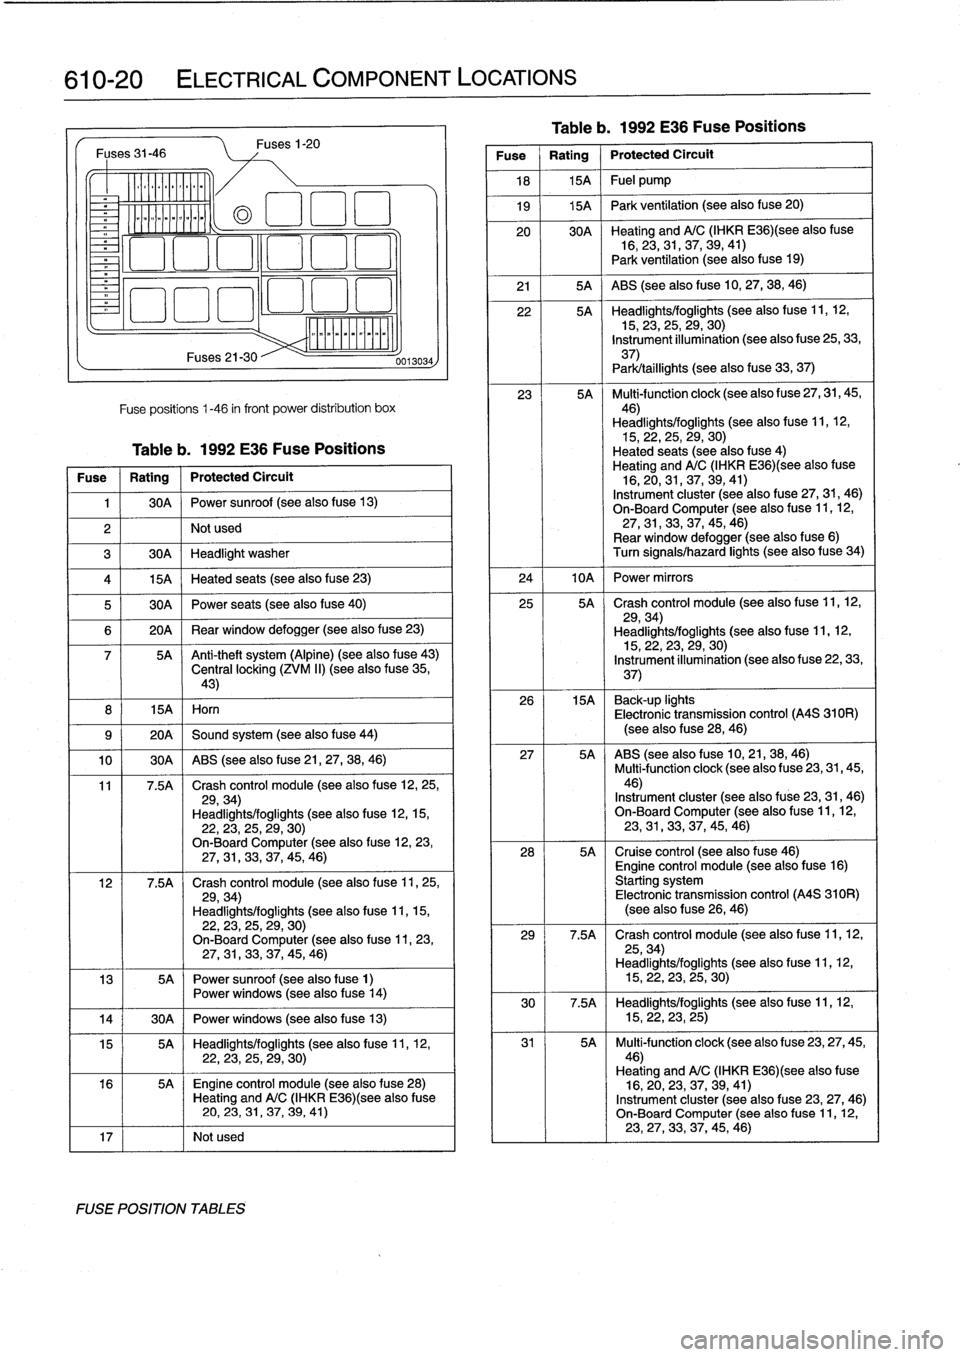 BMW 318i 1997 E36 Service Manual 
610-20

	

ELECTRICAL
COMPONENT
LOCATIONS

Fuses
31-46

o_

~oomoo
ommmo~

8
I

	

15A
I
Horn
Fuses21-30

Fuses
1-20

Fuse
positions
1-46
in
front
power
distribution
box

Table
b
.
1992
E36
Fuse
Posi